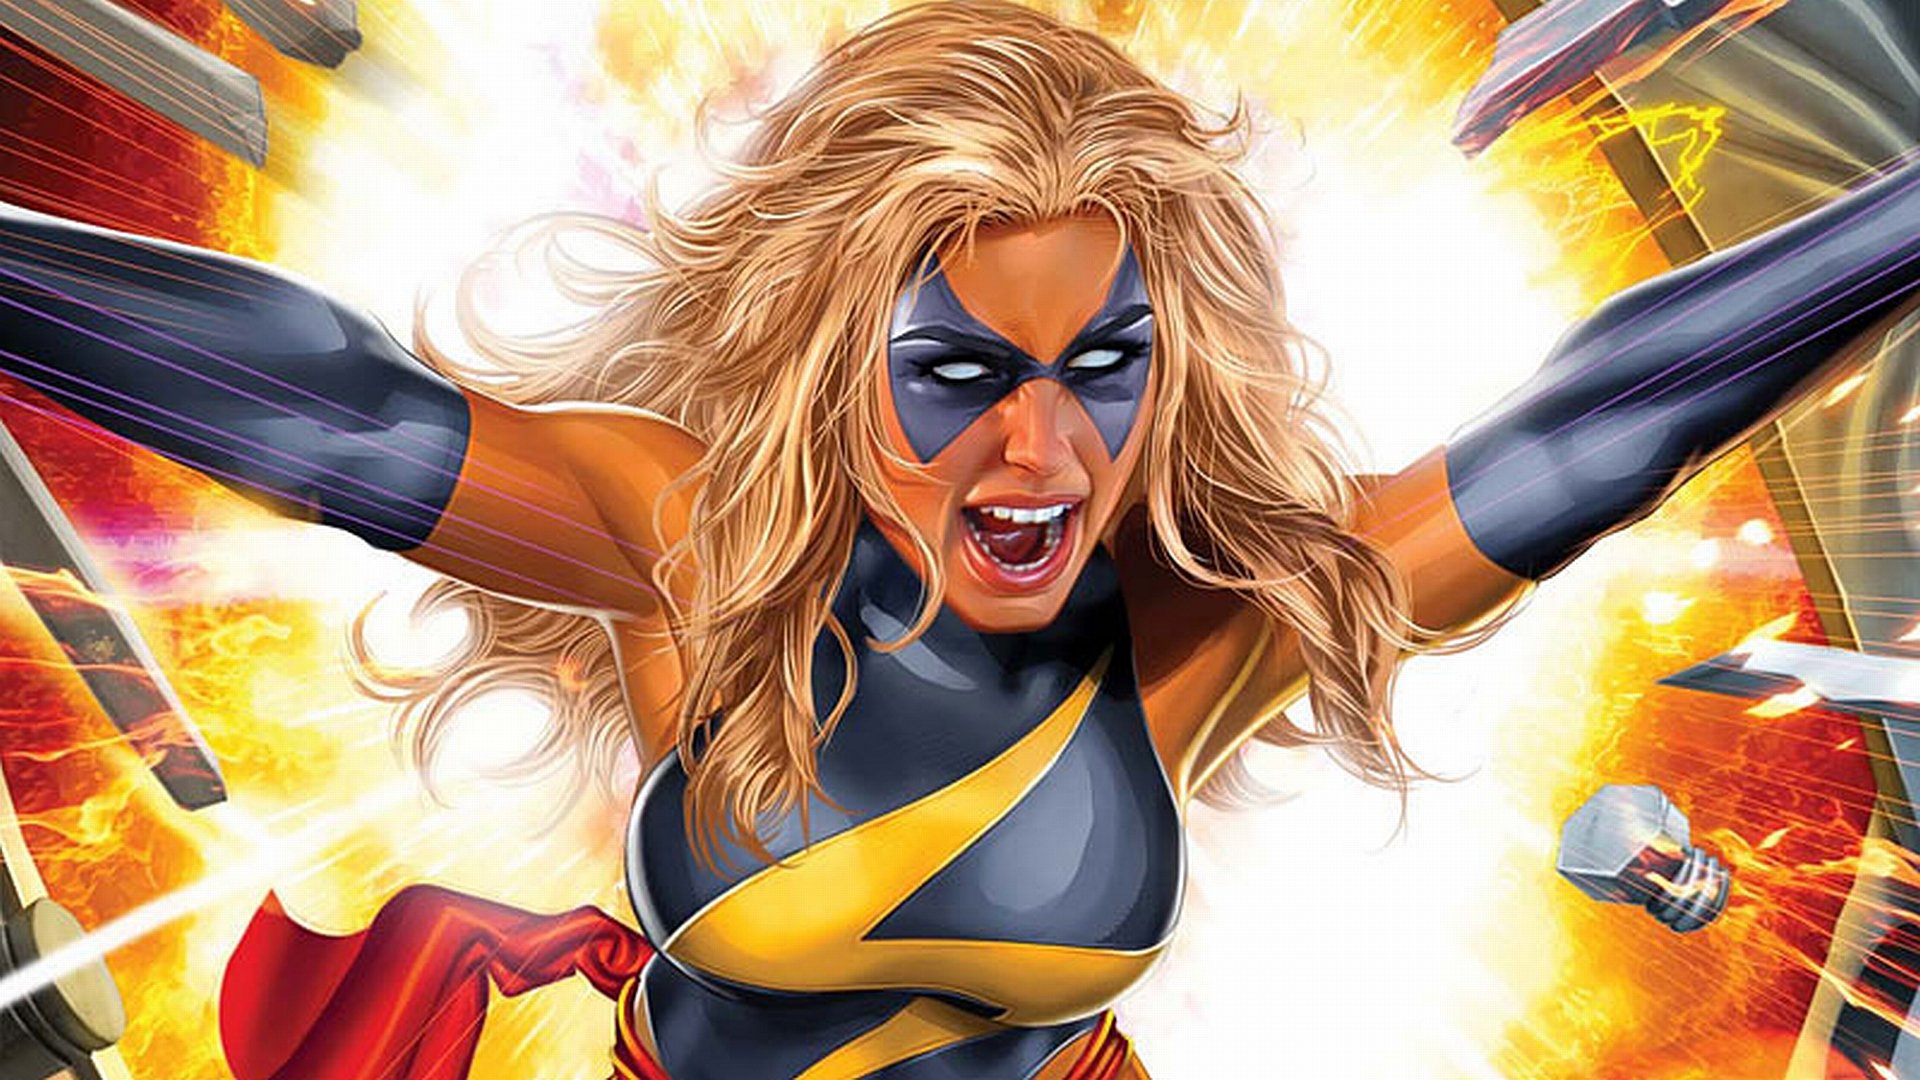 64 Ms Marvel Hd Wallpapers Background Images Wallpaper Abyss Images, Photos, Reviews